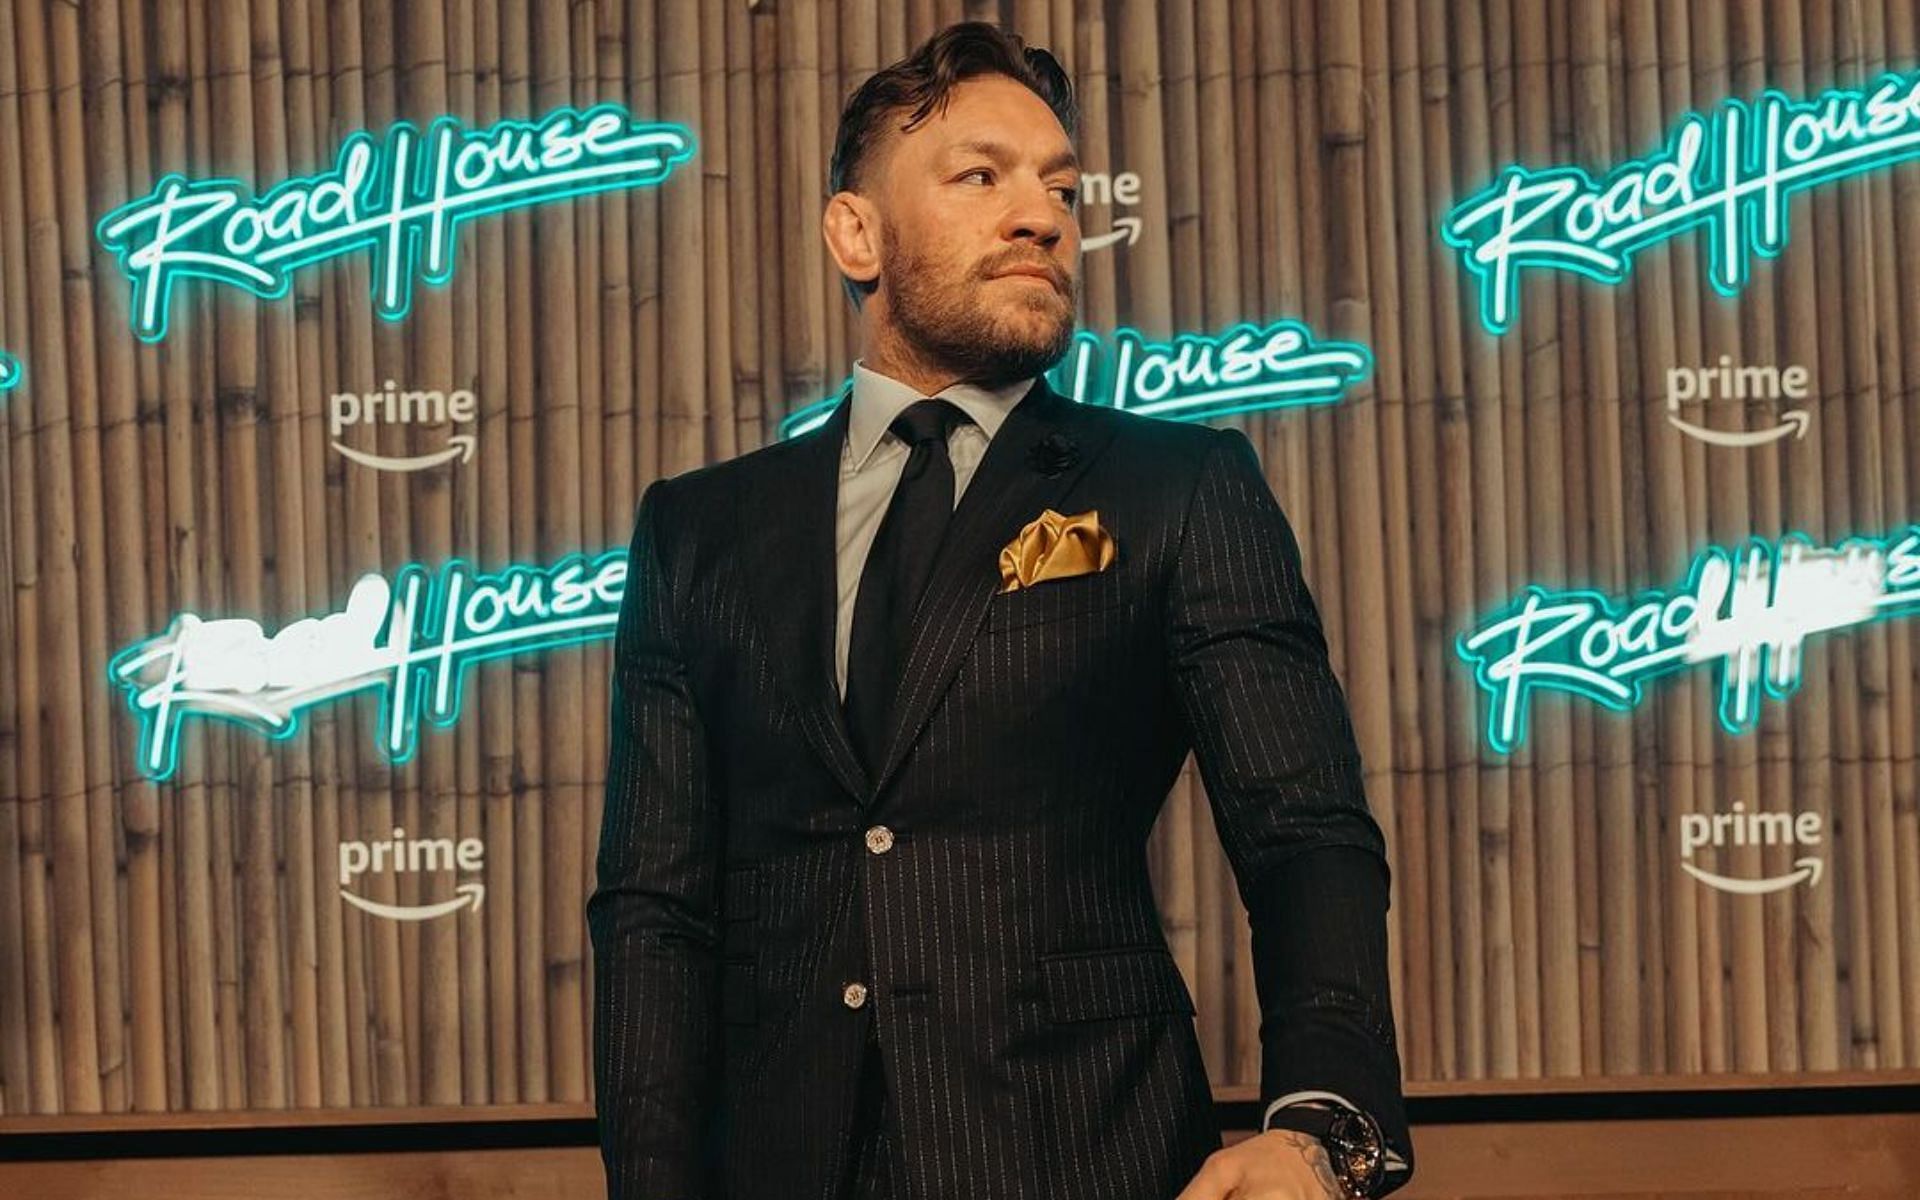 Conor McGregor shares series of photos from his time at 